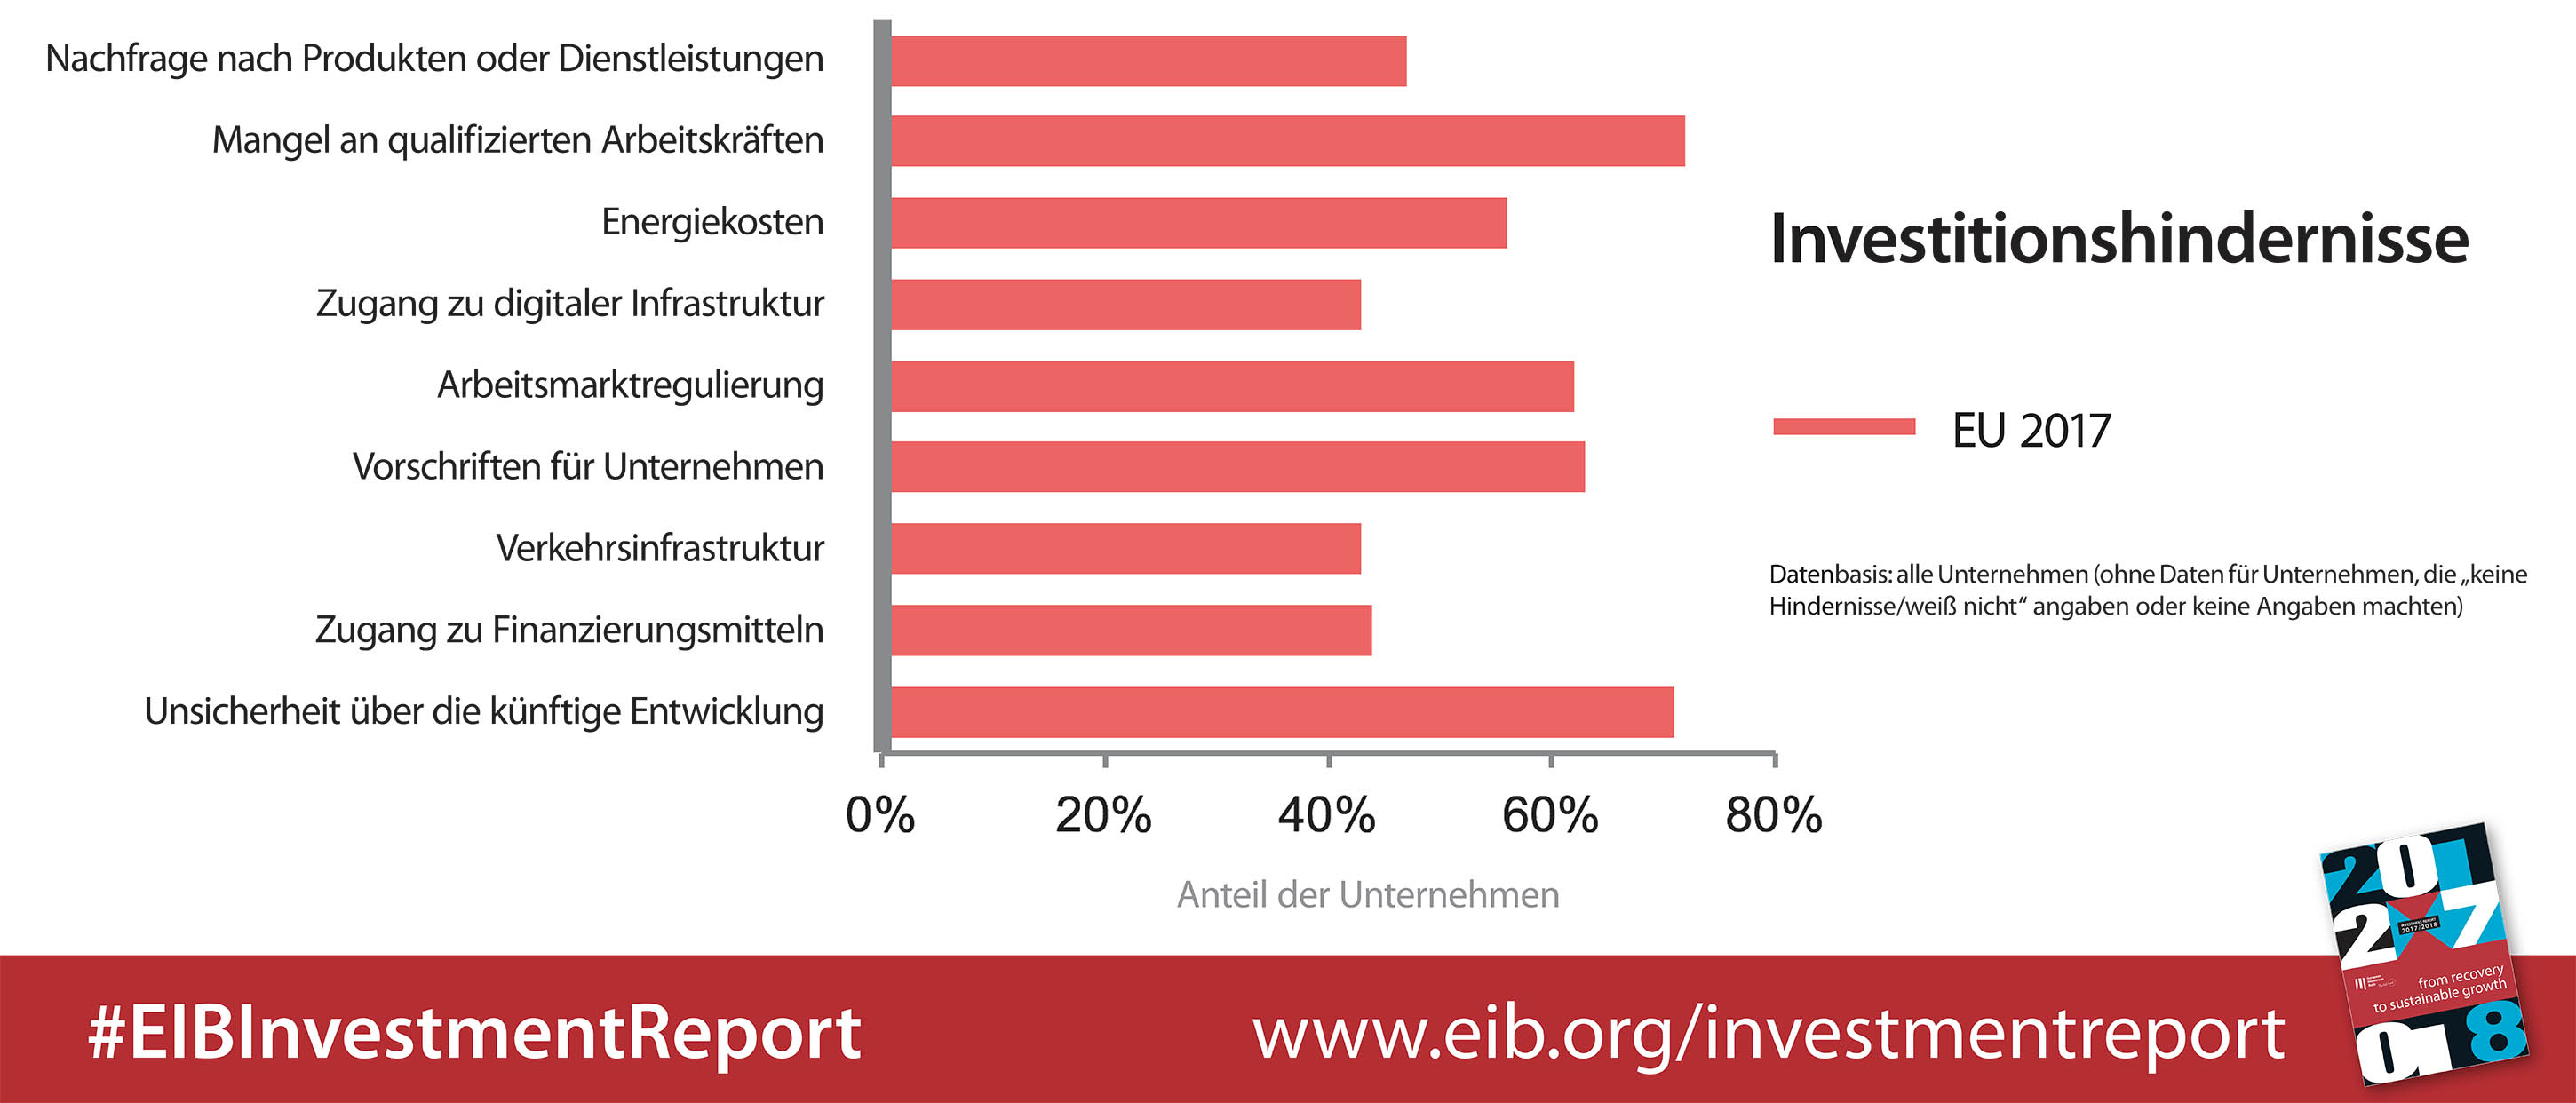 Barriers to Investment in the EU (2017) graphic